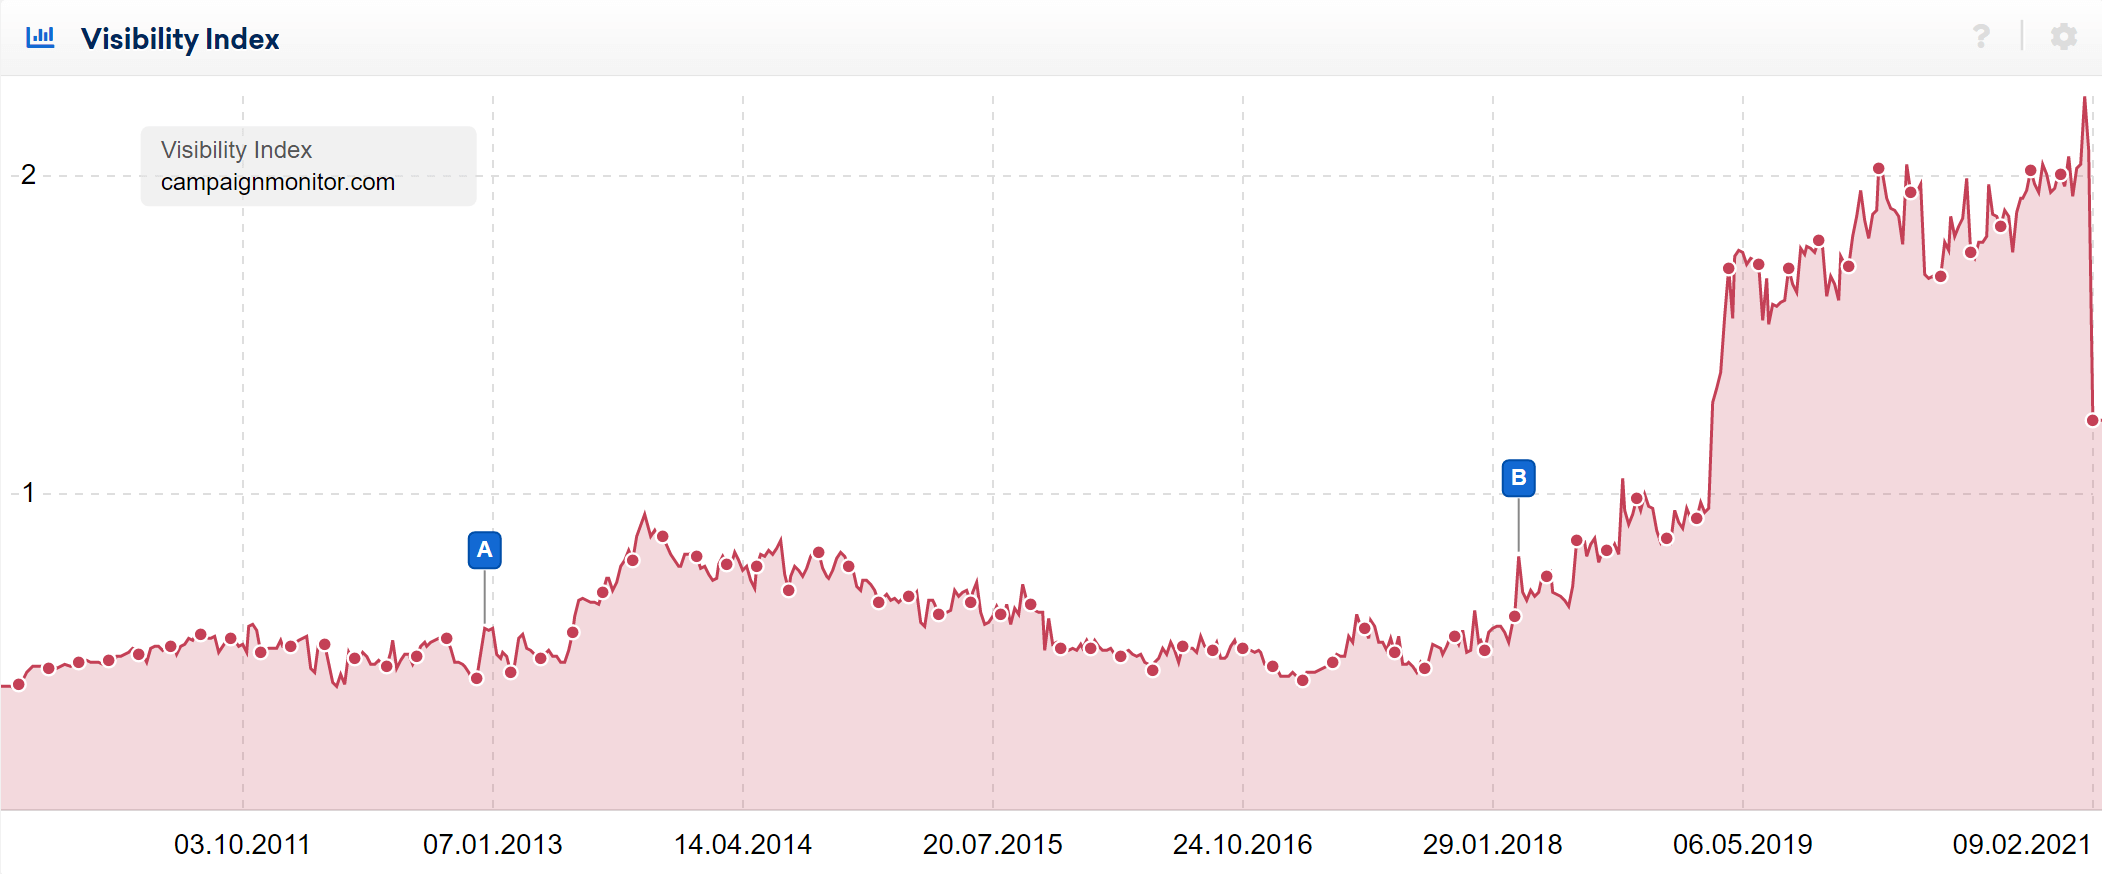 A crash in the Visibility Index graph for the domain campaignmonitor.com